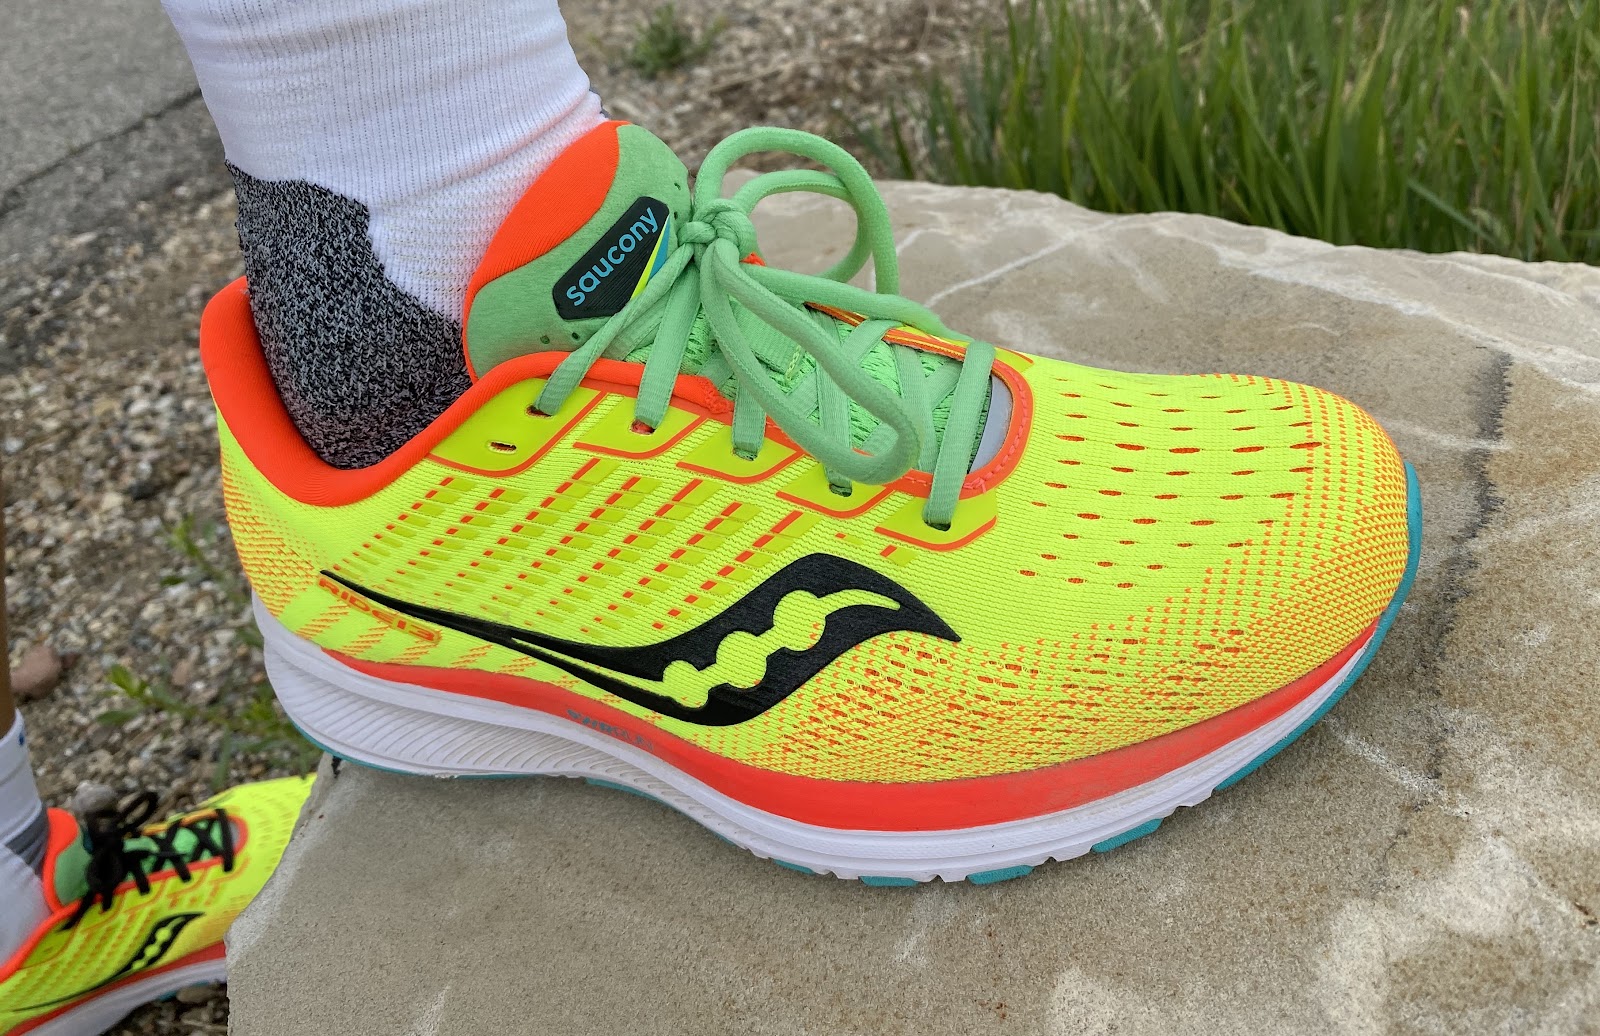 Road Trail Run: Saucony Ride 13 Initial Video Review. Comparisons to 2020  Saucony Line and More!